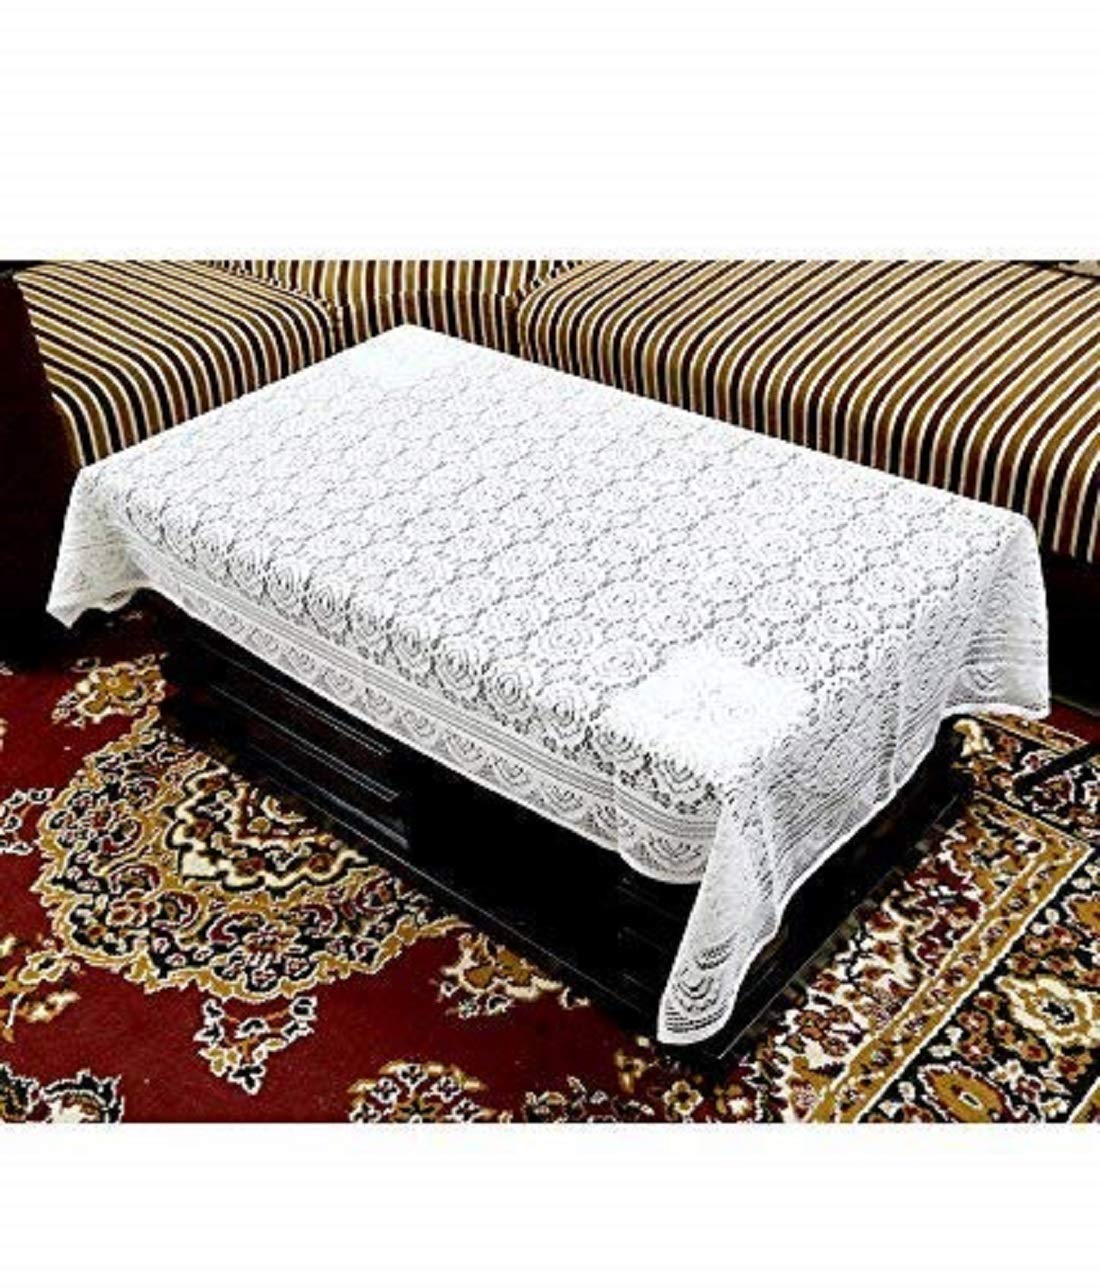 Kuber Industries Center Table Cover|Cotton Center Table Cover for Living Room|Table Cloth for 4 Seater|White